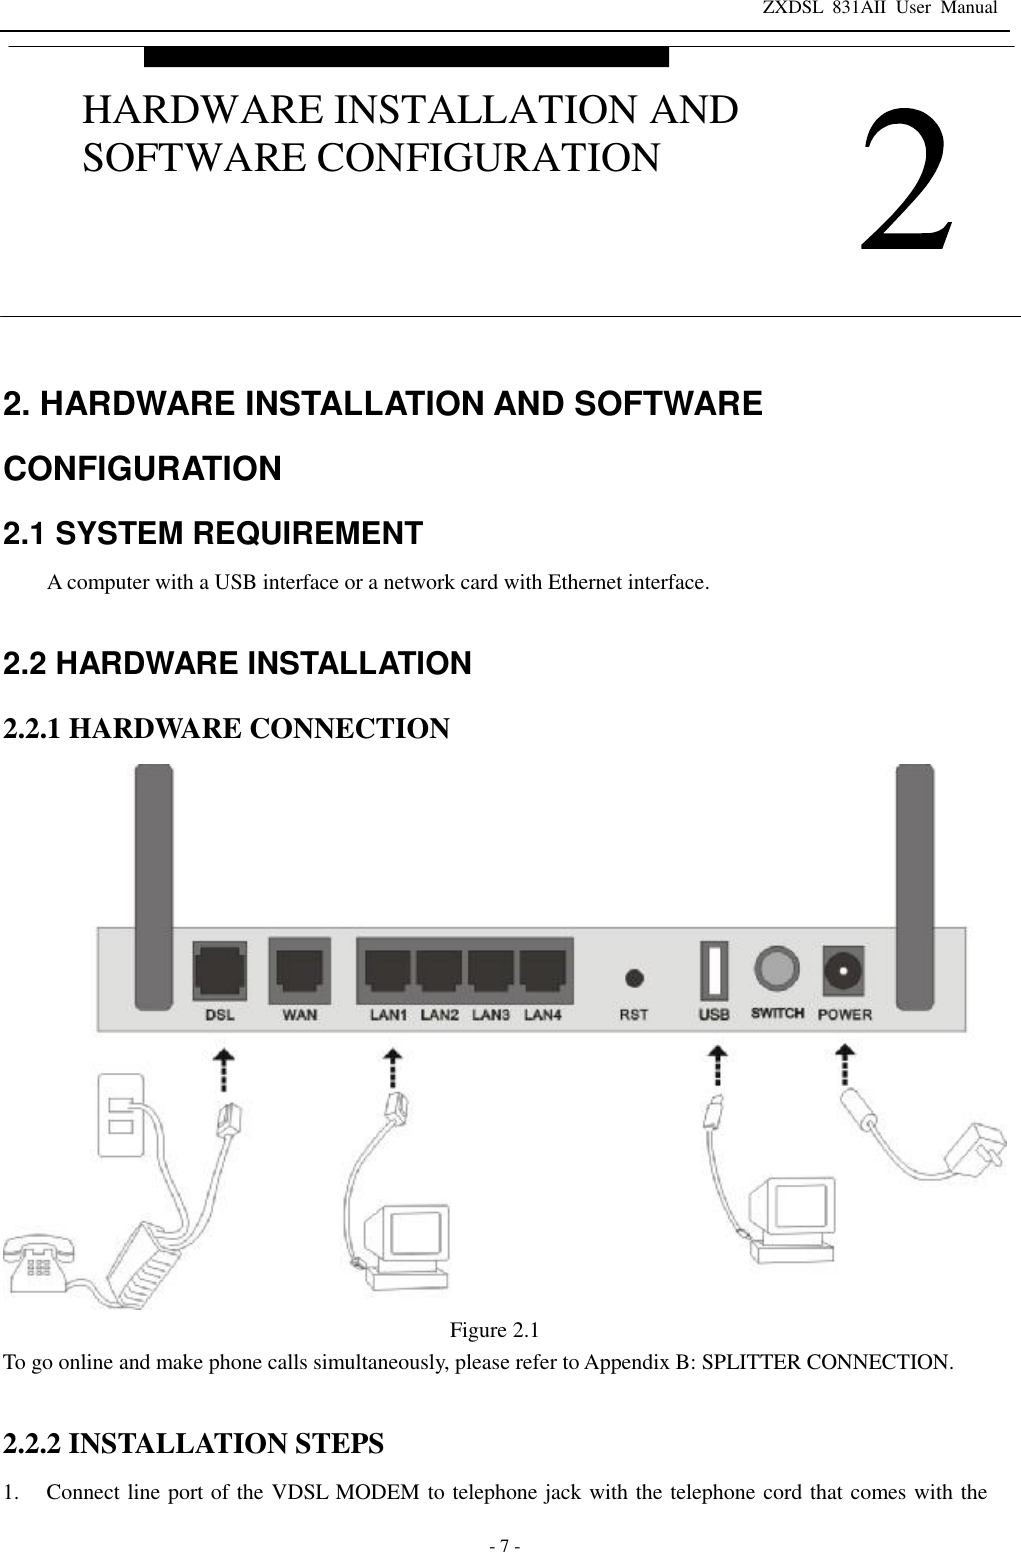 ZXDSL 831AII User Manual  - 7 - 2. HARDWARE INSTALLATION AND SOFTWARE CONFIGURATION 2.1 SYSTEM REQUIREMENT A computer with a USB interface or a network card with Ethernet interface.  2.2 HARDWARE INSTALLATION 2.2.1 HARDWARE CONNECTION  Figure 2.1 To go online and make phone calls simultaneously, please refer to Appendix B: SPLITTER CONNECTION.  2.2.2 INSTALLATION STEPS 1. Connect line port of the VDSL MODEM to telephone jack with the telephone cord that comes with the  HARDWARE INSTALLATION AND SOFTWARE CONFIGURATION 